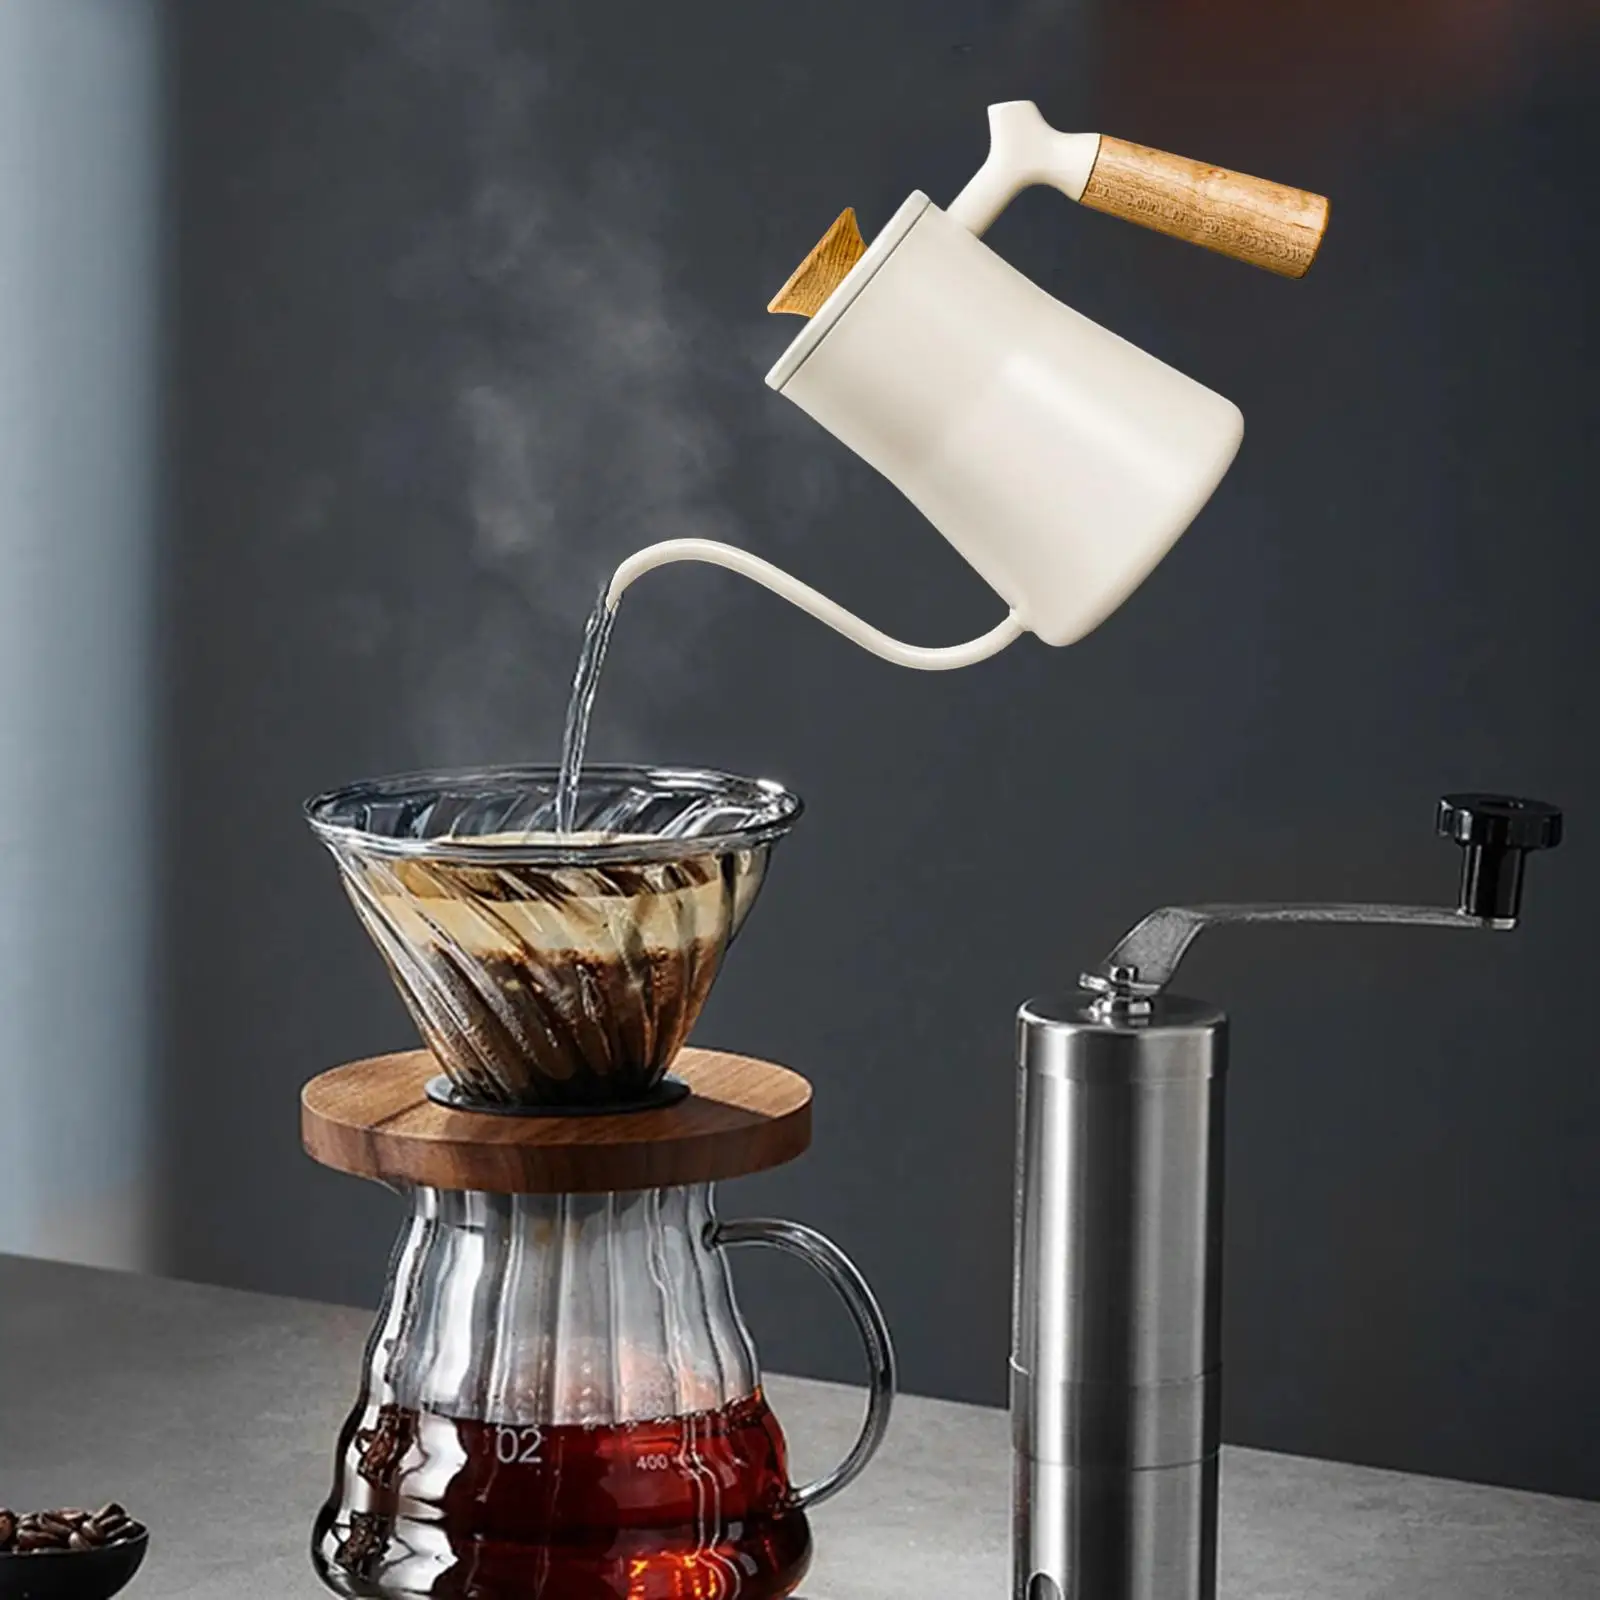 Pour over Coffee Kettle with Lid Small Teapot Pour over Drip Kettle for Pour over Coffee Brew Tea Boil Hot Water All Stovetops